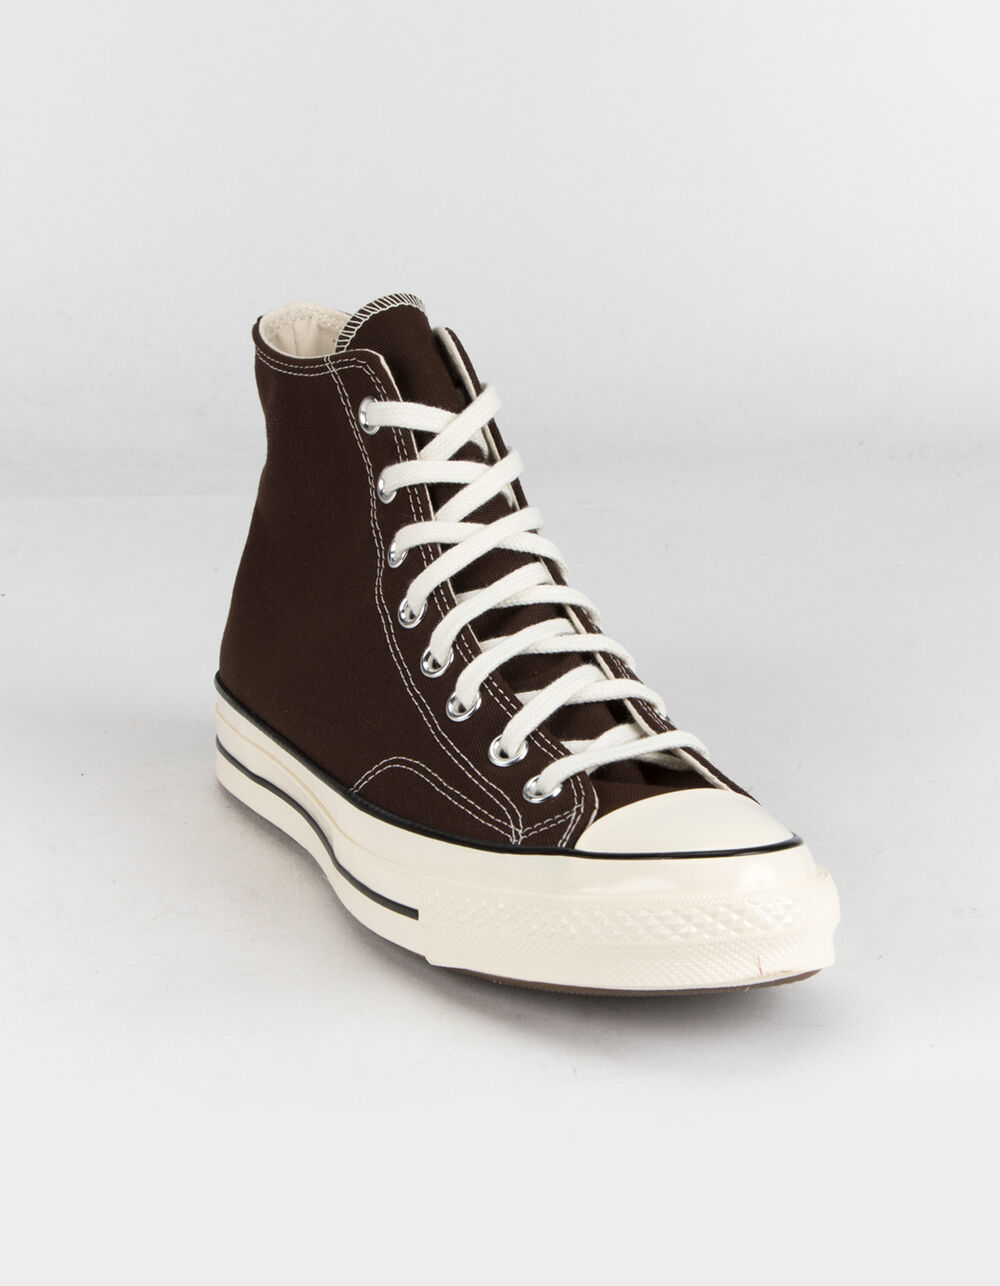 Converse Chuck 70 Leather High 'Colorblock - Dark Root Brown' | Men's Size 3.5